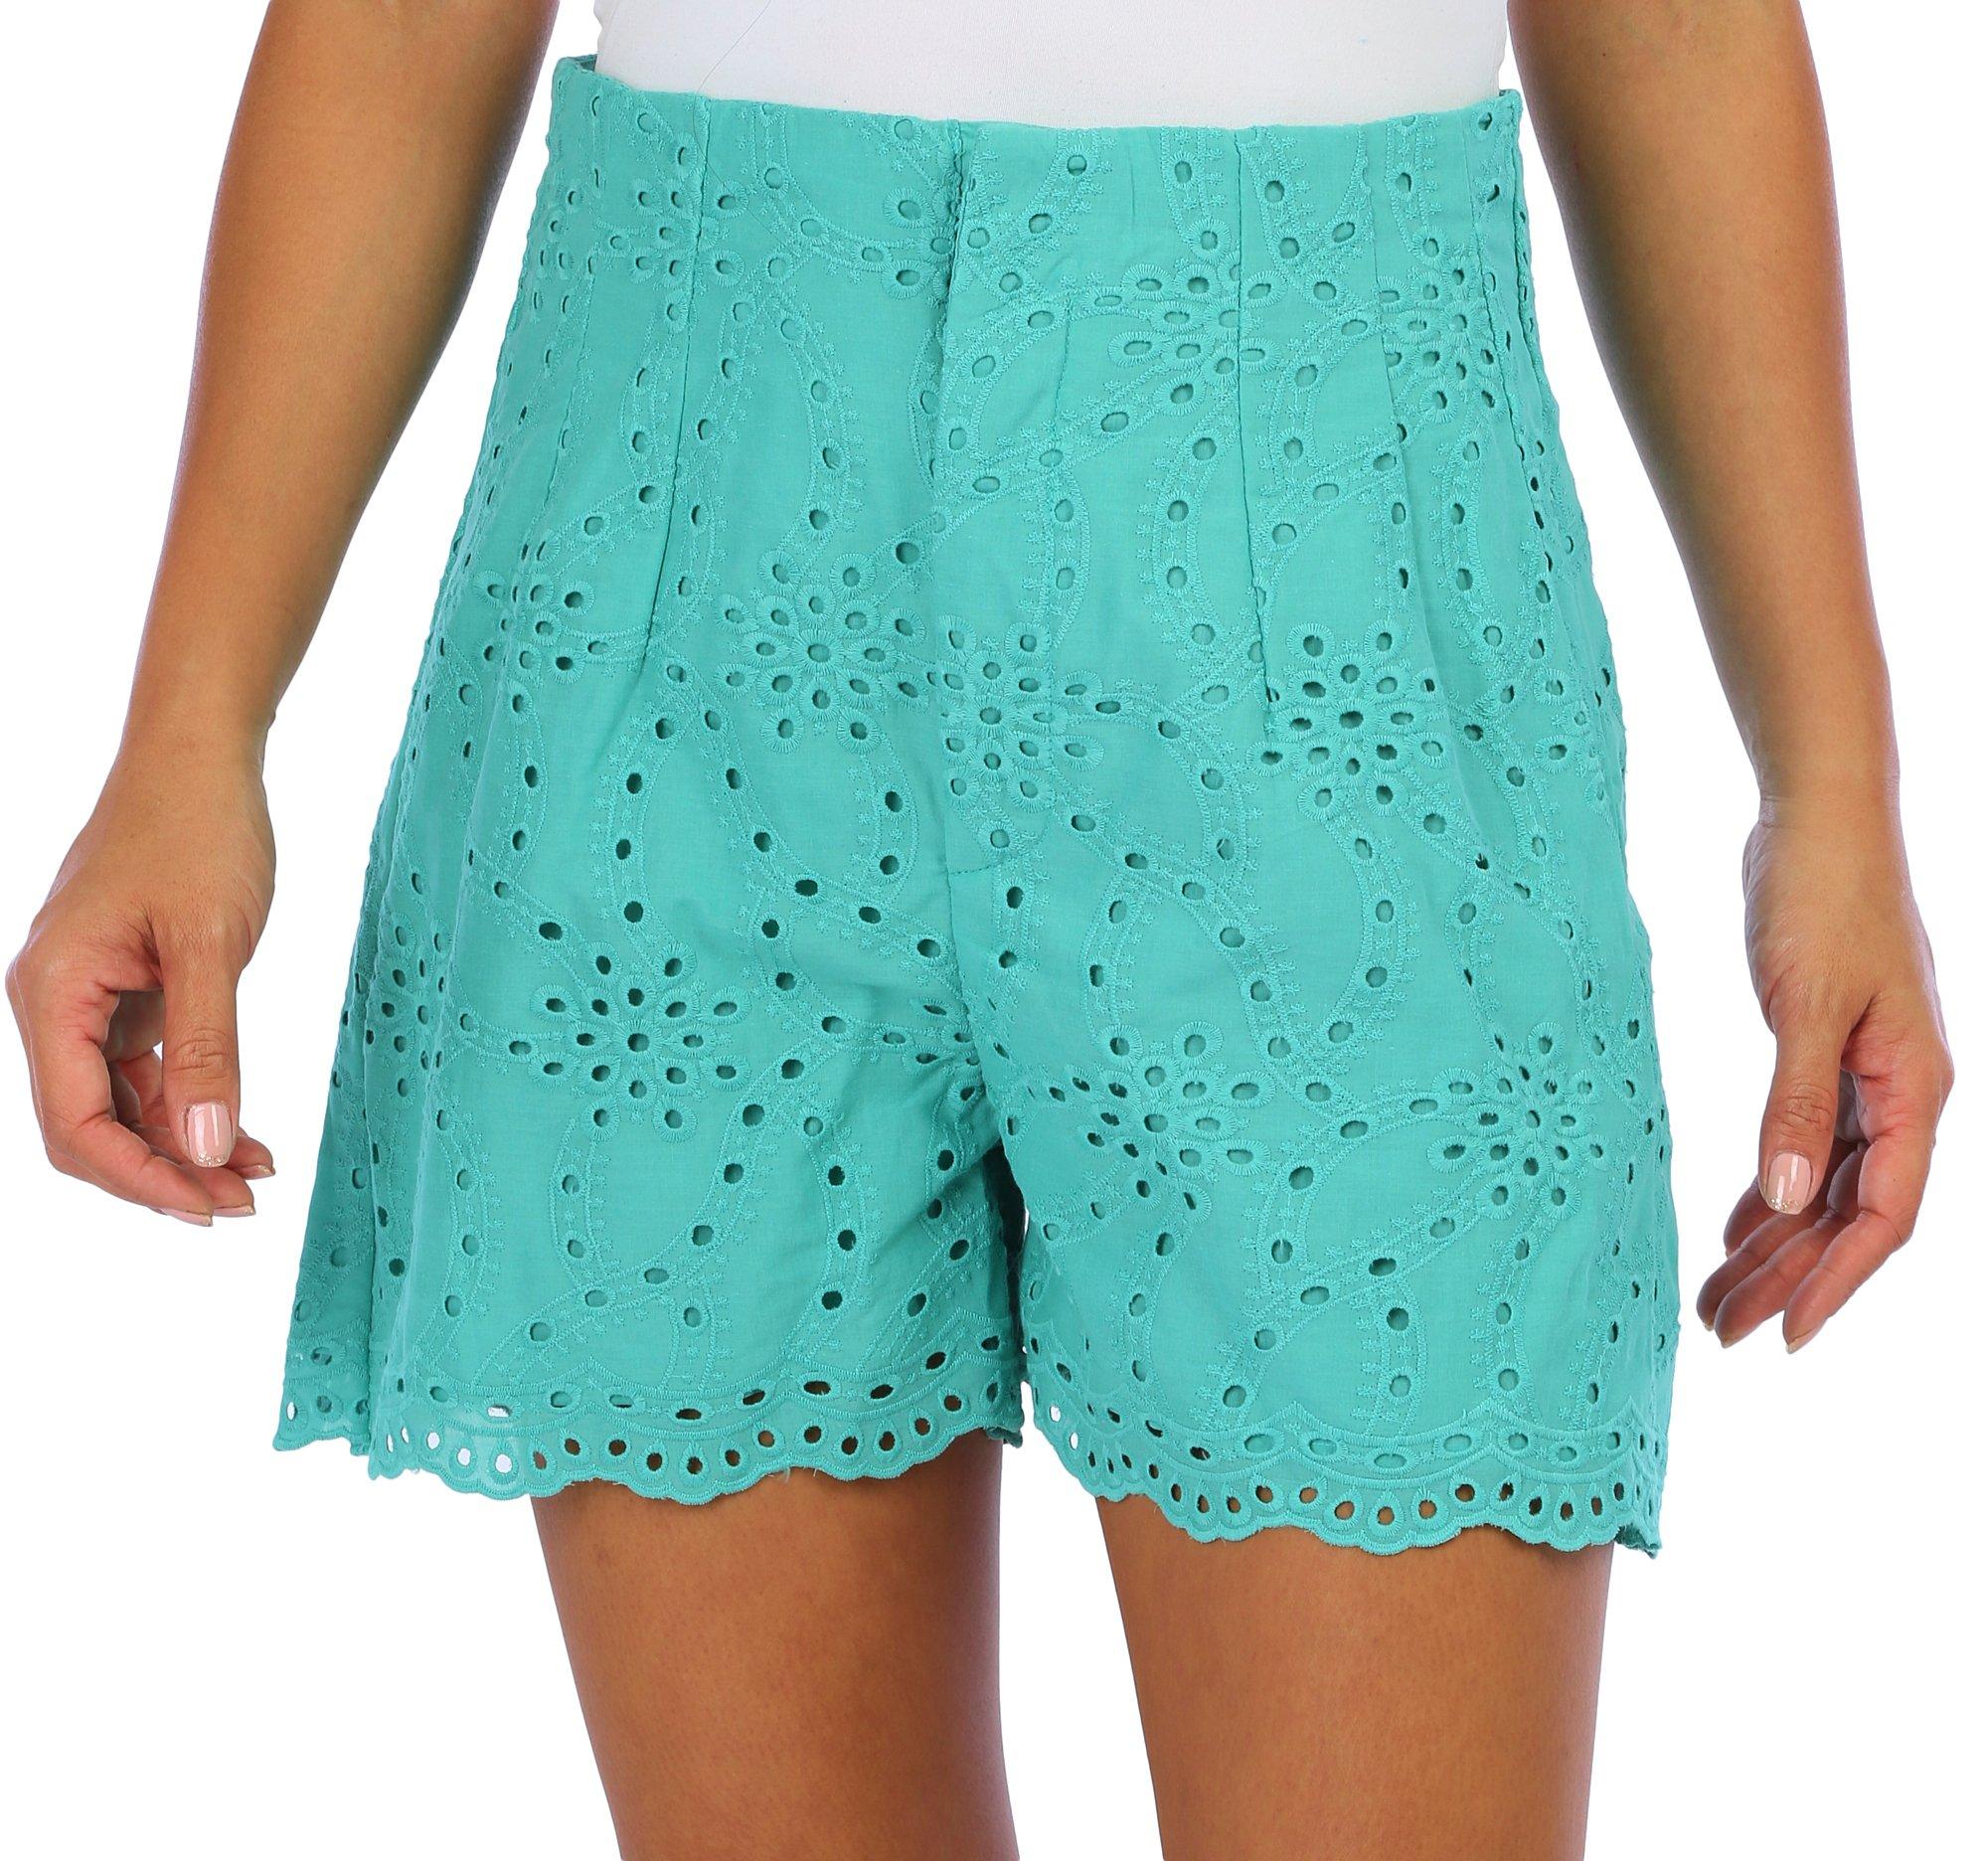 Womens Solid Lace Shorts